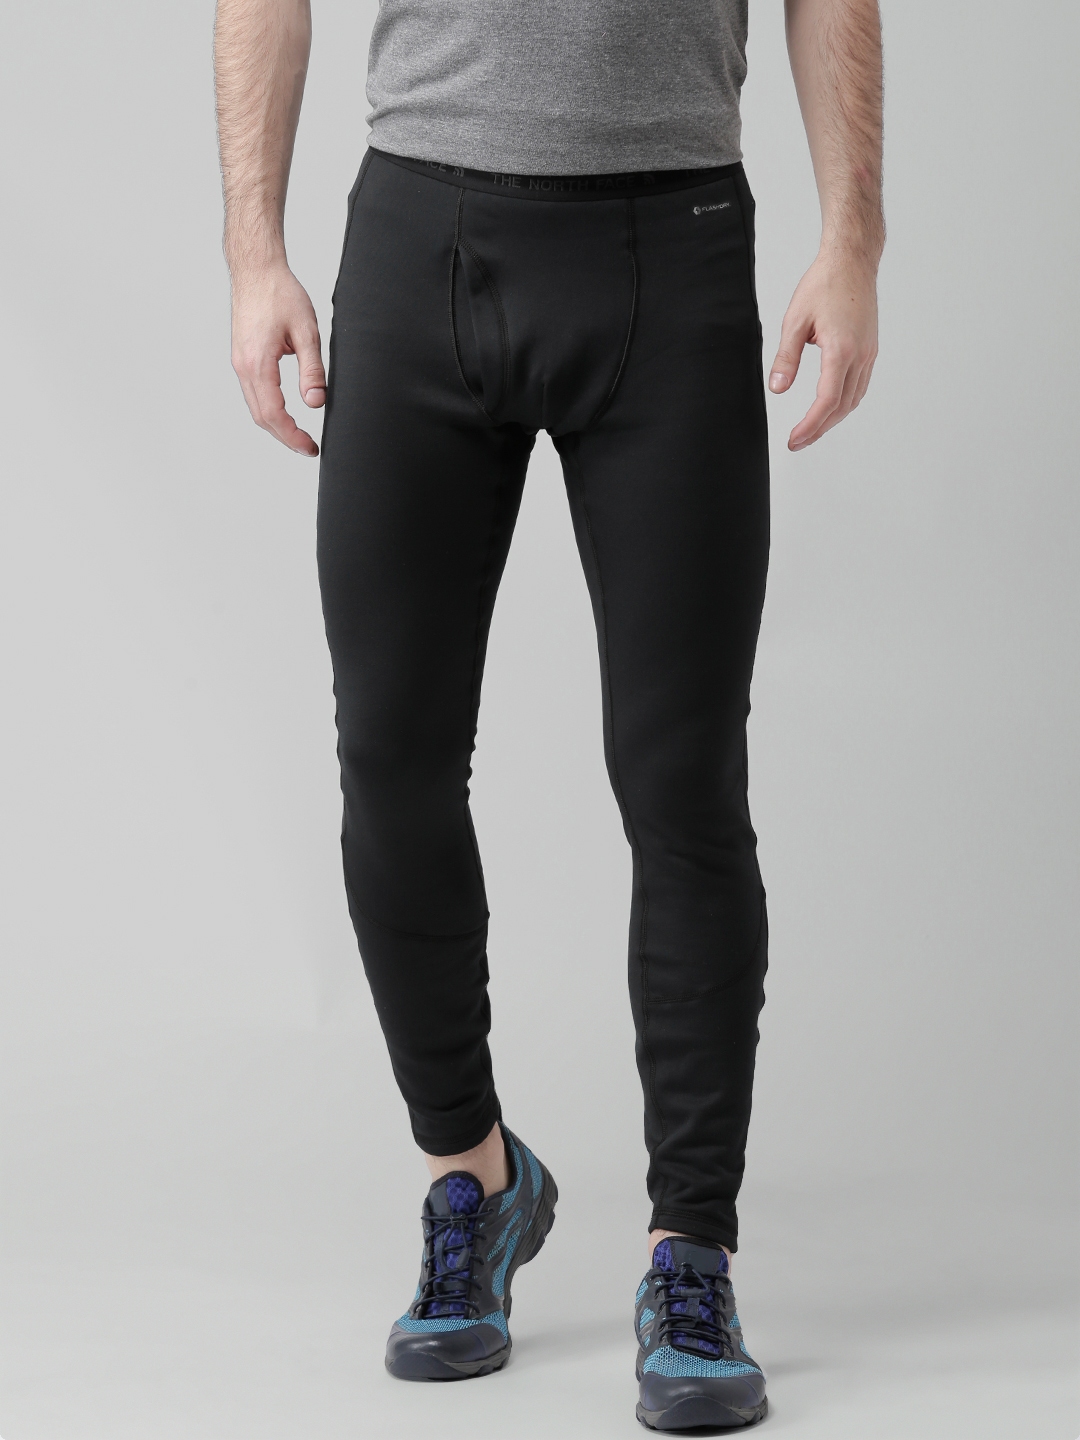 Buy The North Face Black Expedition FlashDry Baselayer Tights